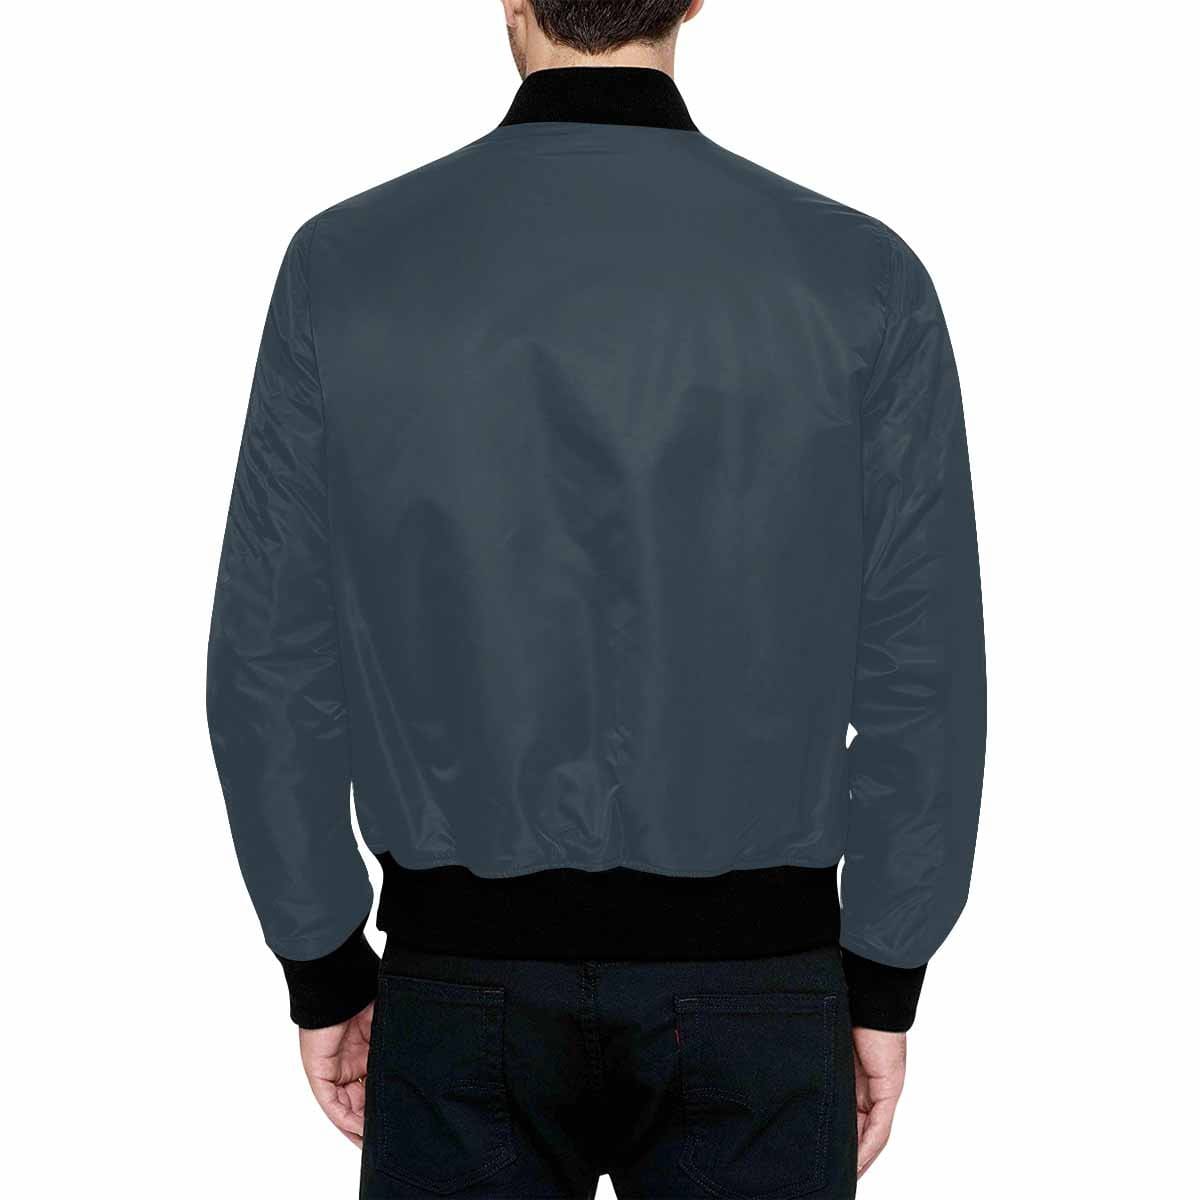 Bomber Jacket For Men Charcoal Black And Black - Mens | Jackets | Bombers